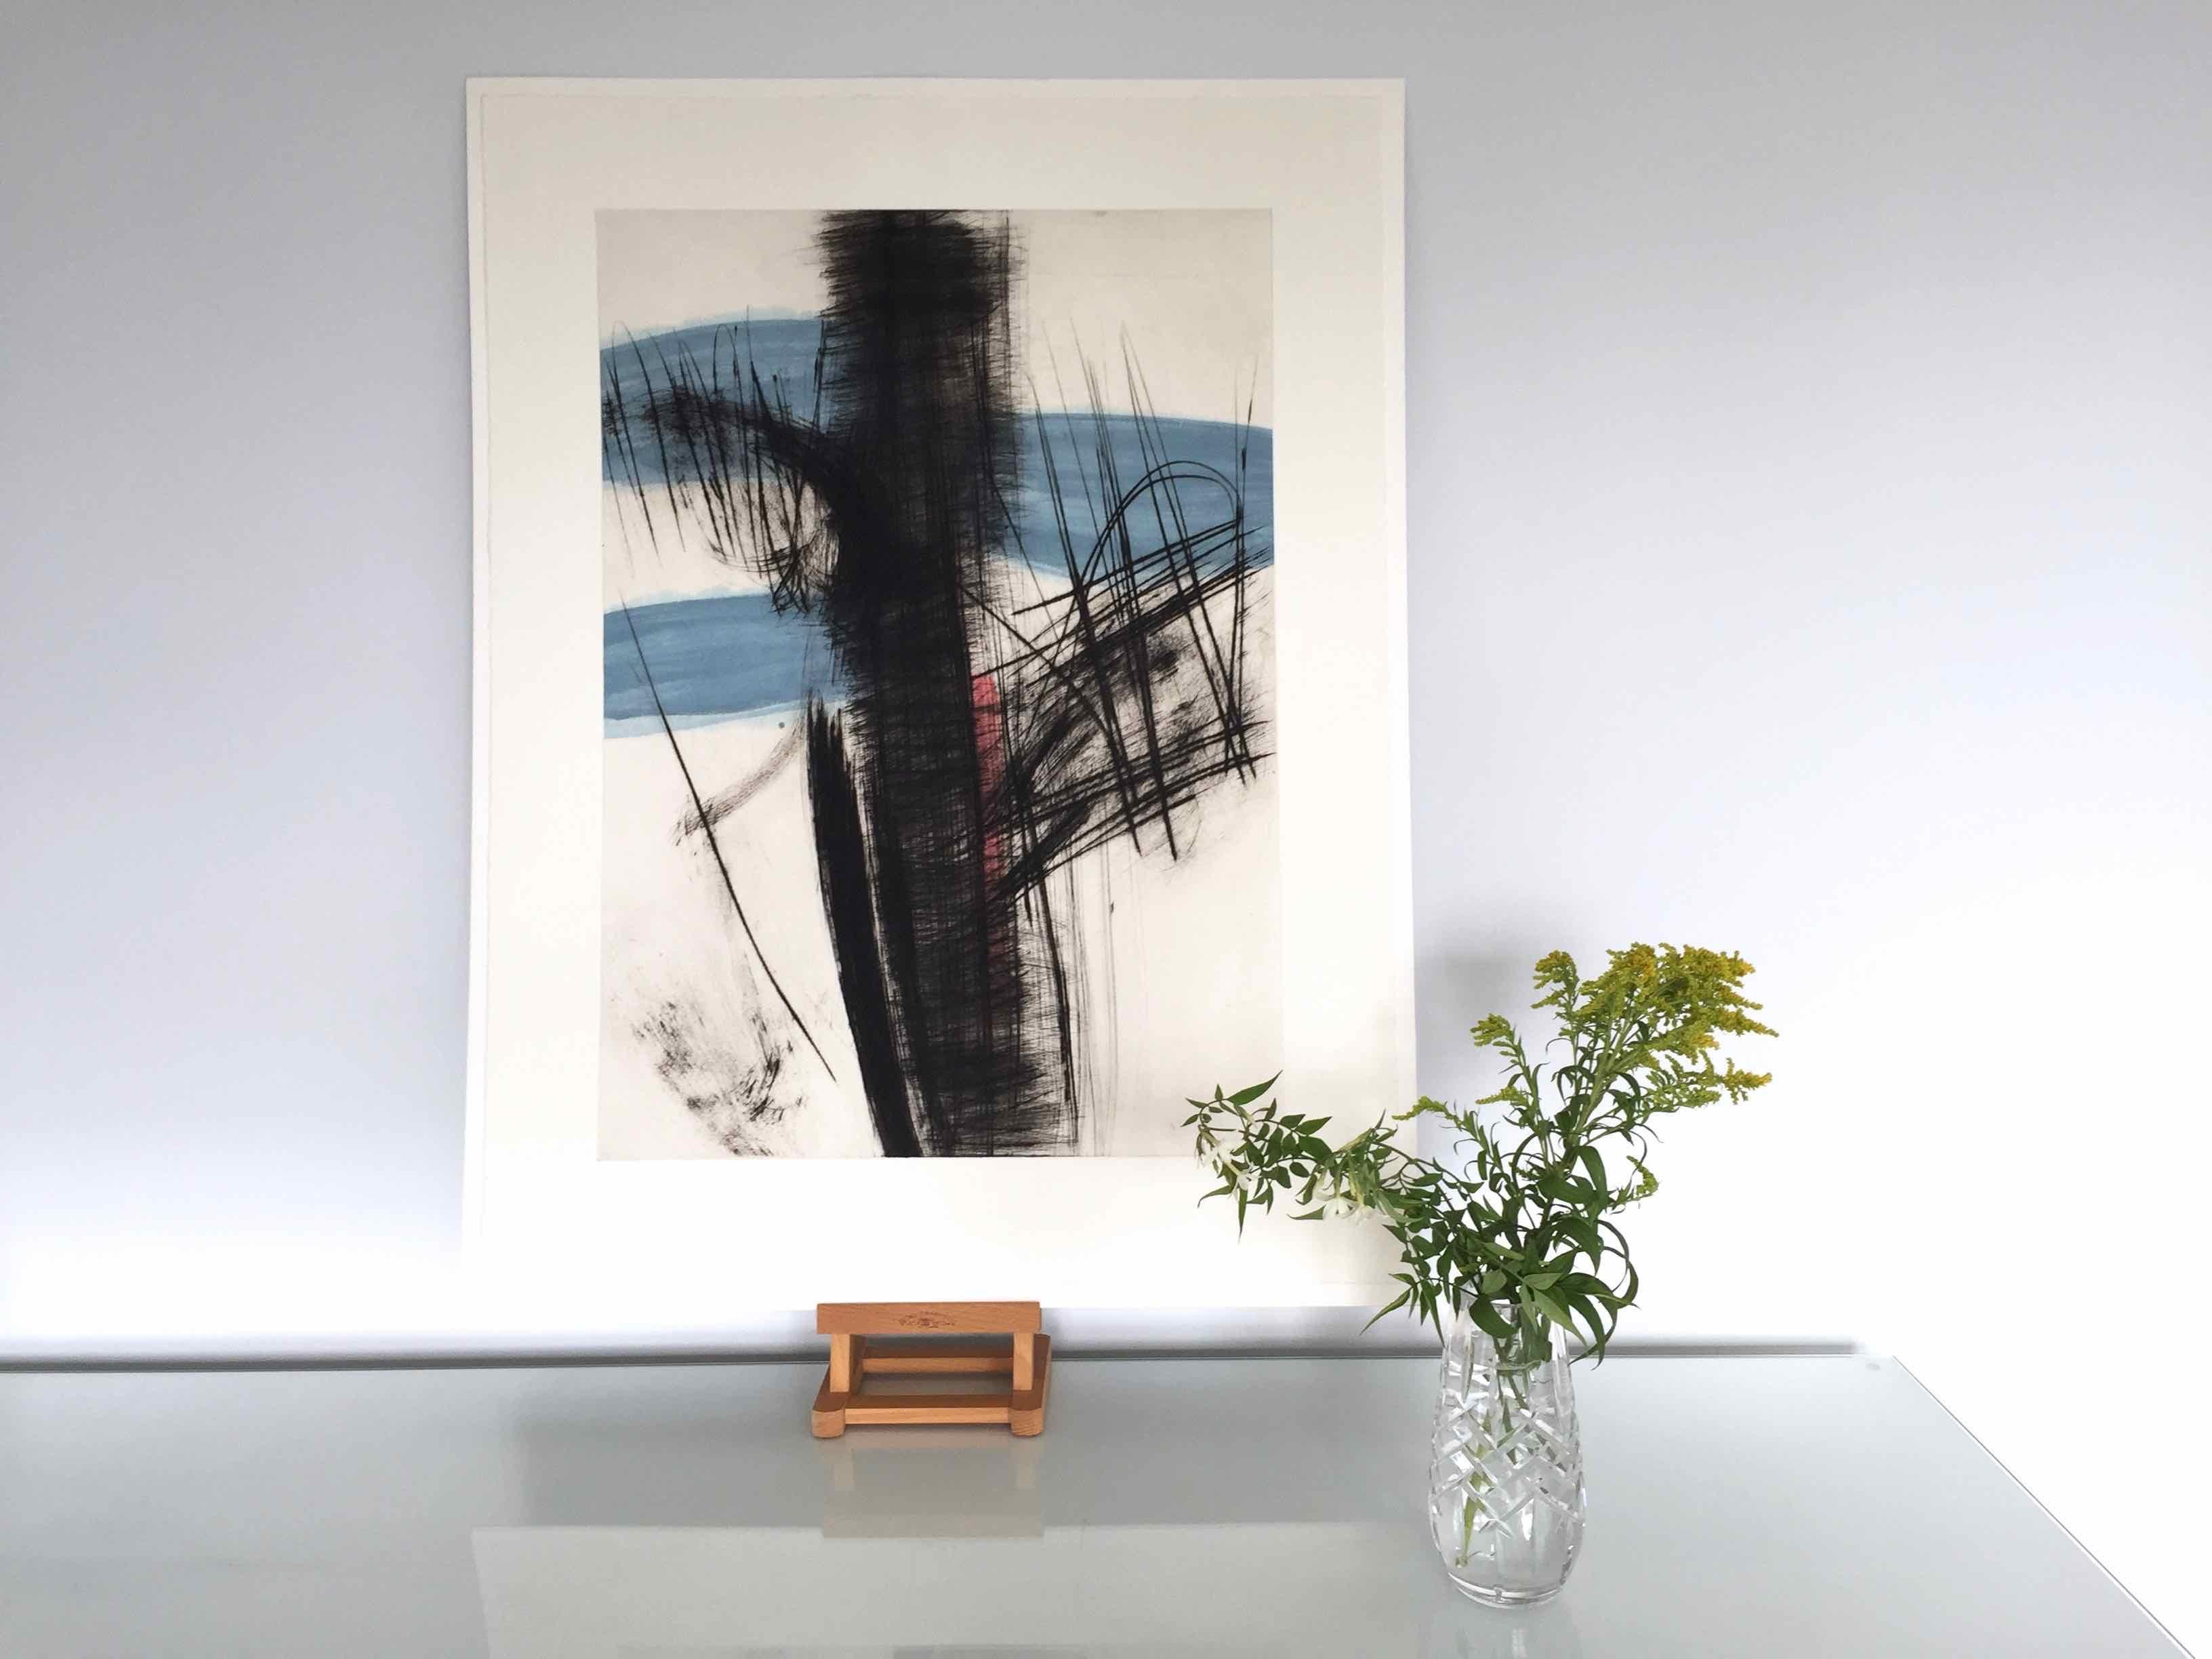 Souche: Limited Edition Engraving with Unique Hand Painting - Abstract Expressionist Print by François Pont